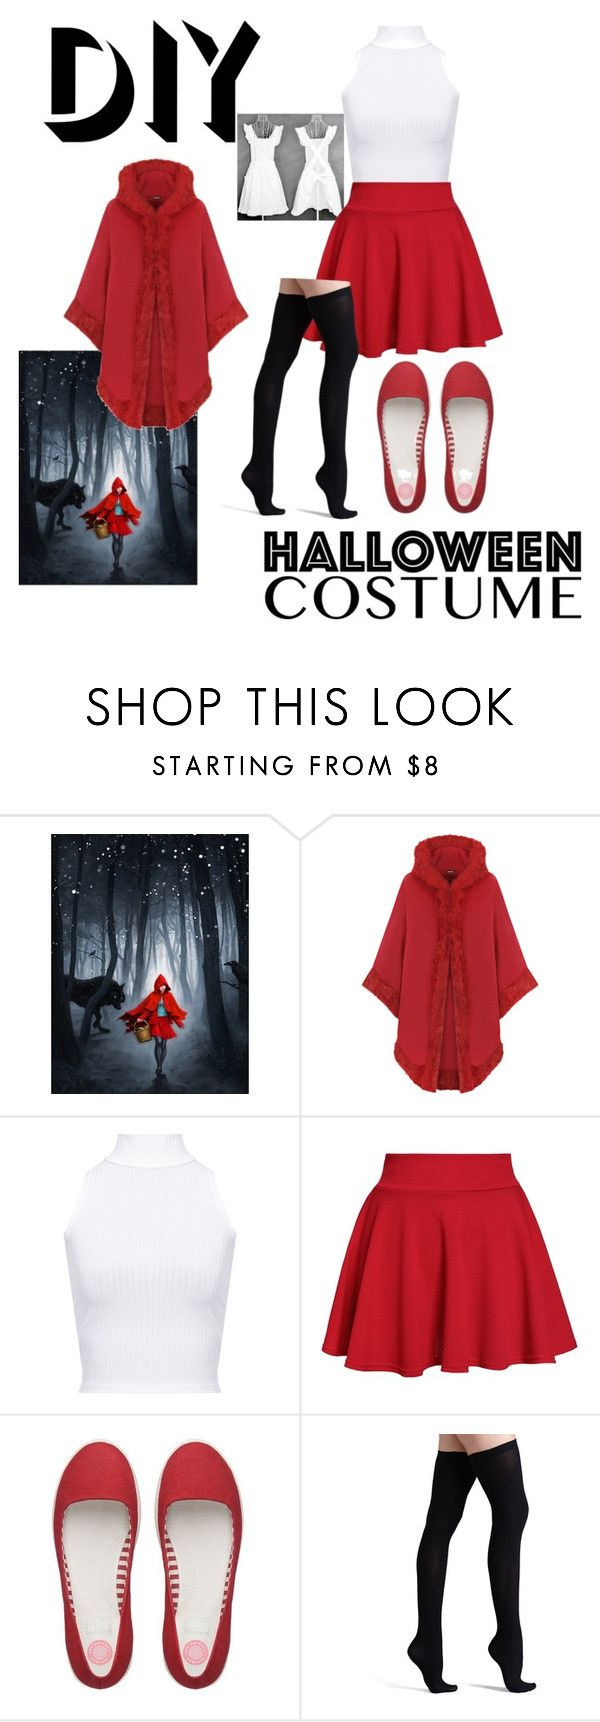 Little Red Riding Hood Costume DIY
 Best 25 Red riding hood costume ideas on Pinterest